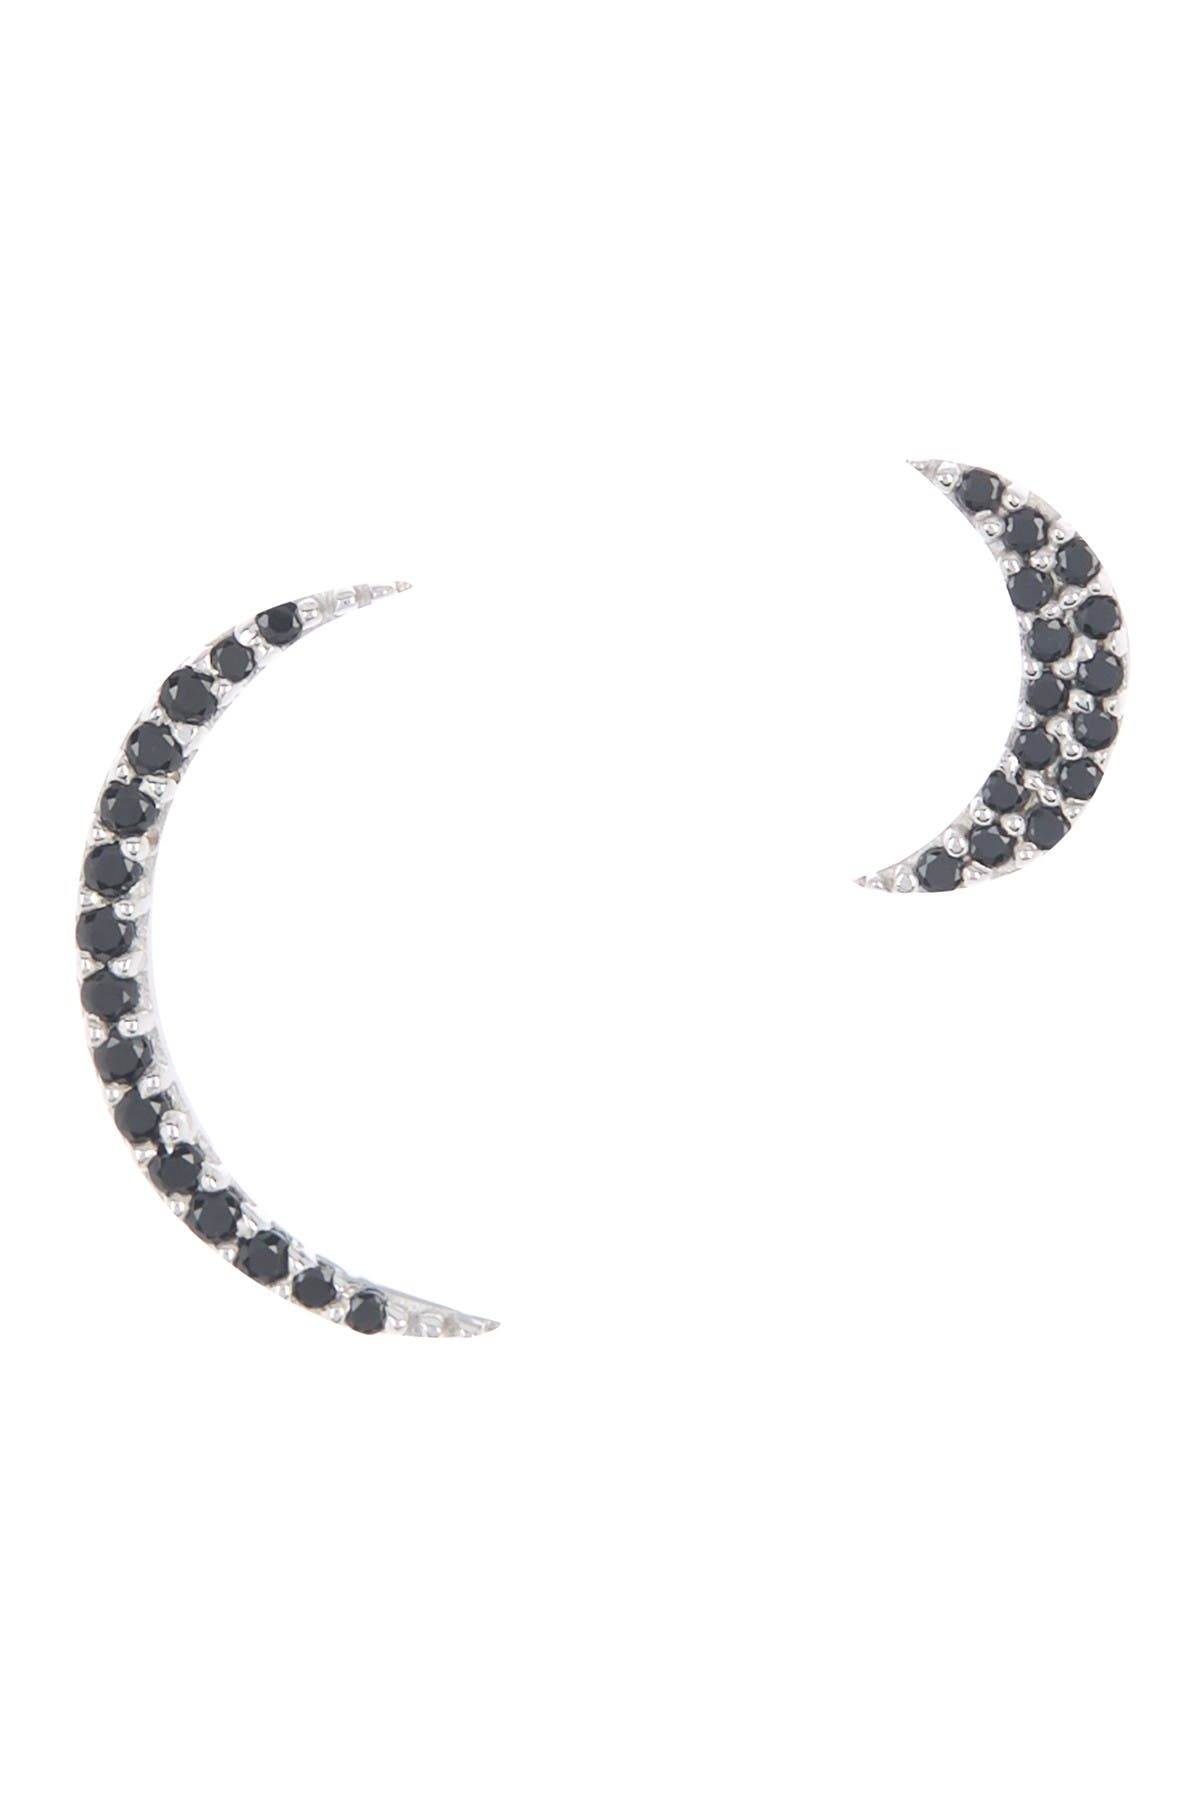 Adornia Fine Sterling Silver Mismatched Pave Black Spinel Moon Stud Earrings